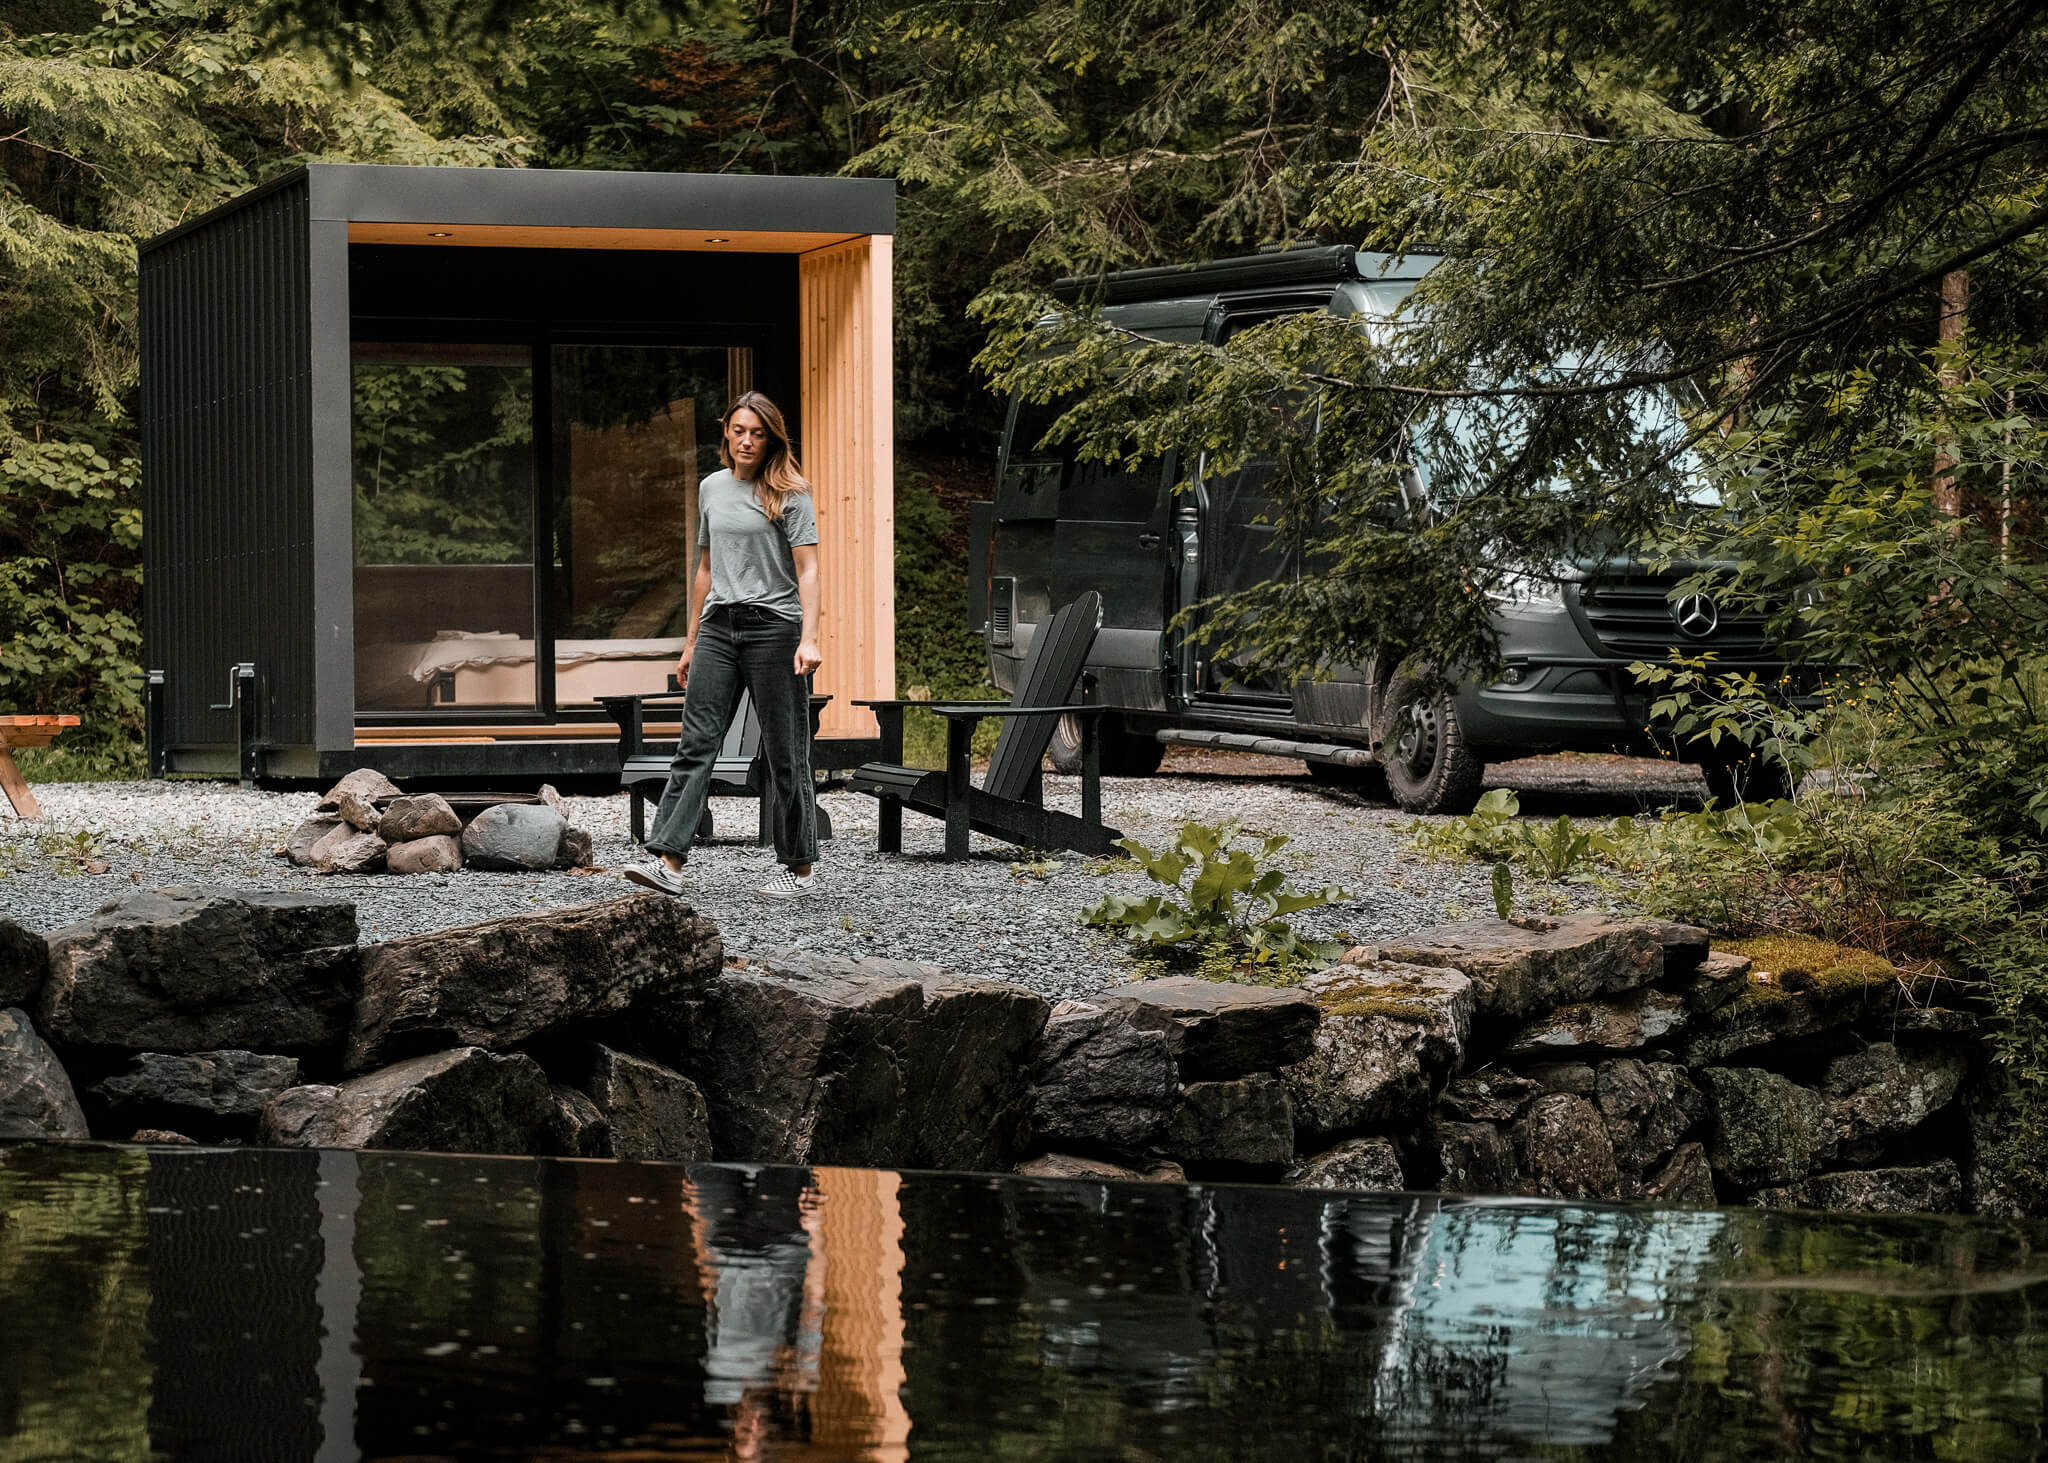 Project featuring a Go-Box overlooking the waterfront next to a van. Relaxation space where one can rest